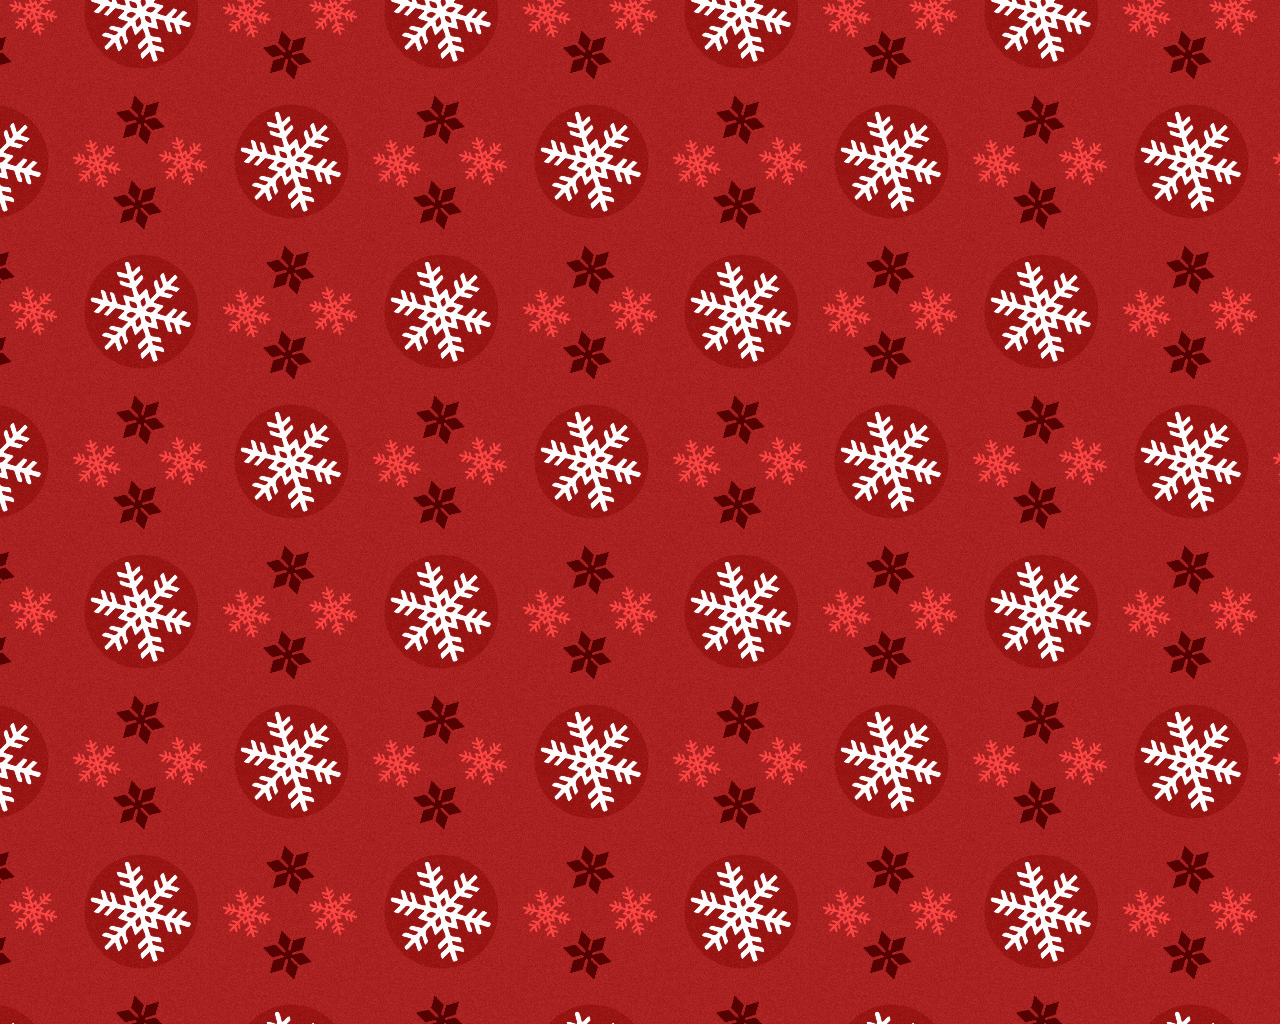 Free Christmas Backgrounds, Wallpapers & Photoshop Patterns